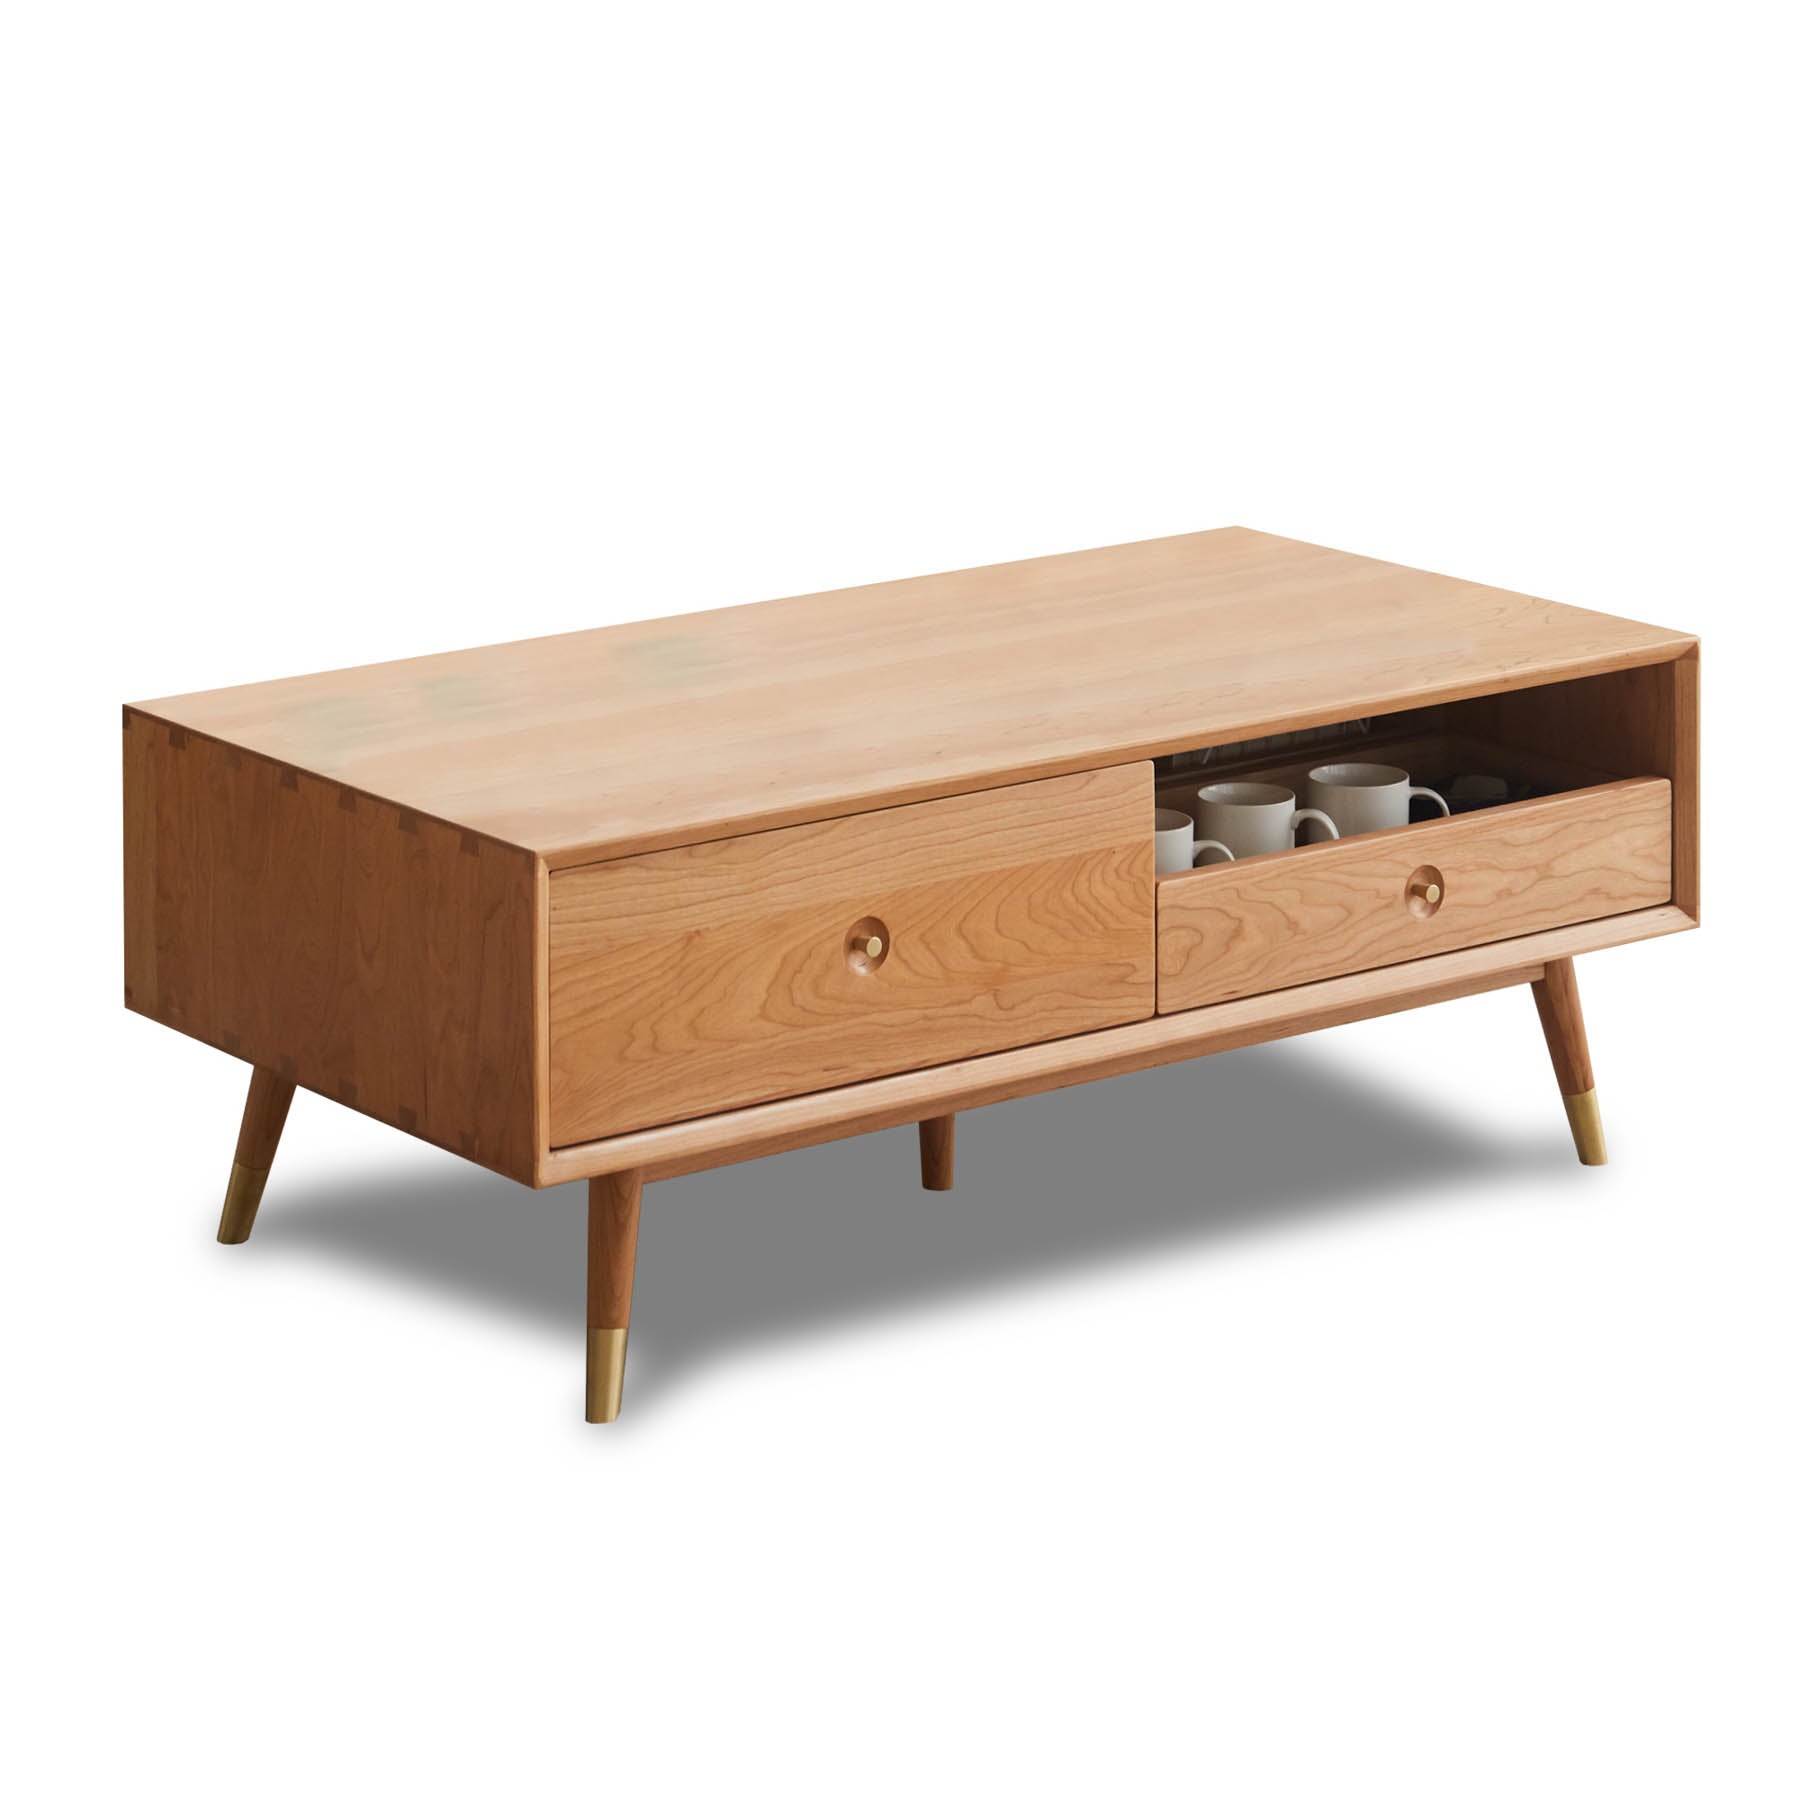 Kleiven Cherry Wood Coffee Table